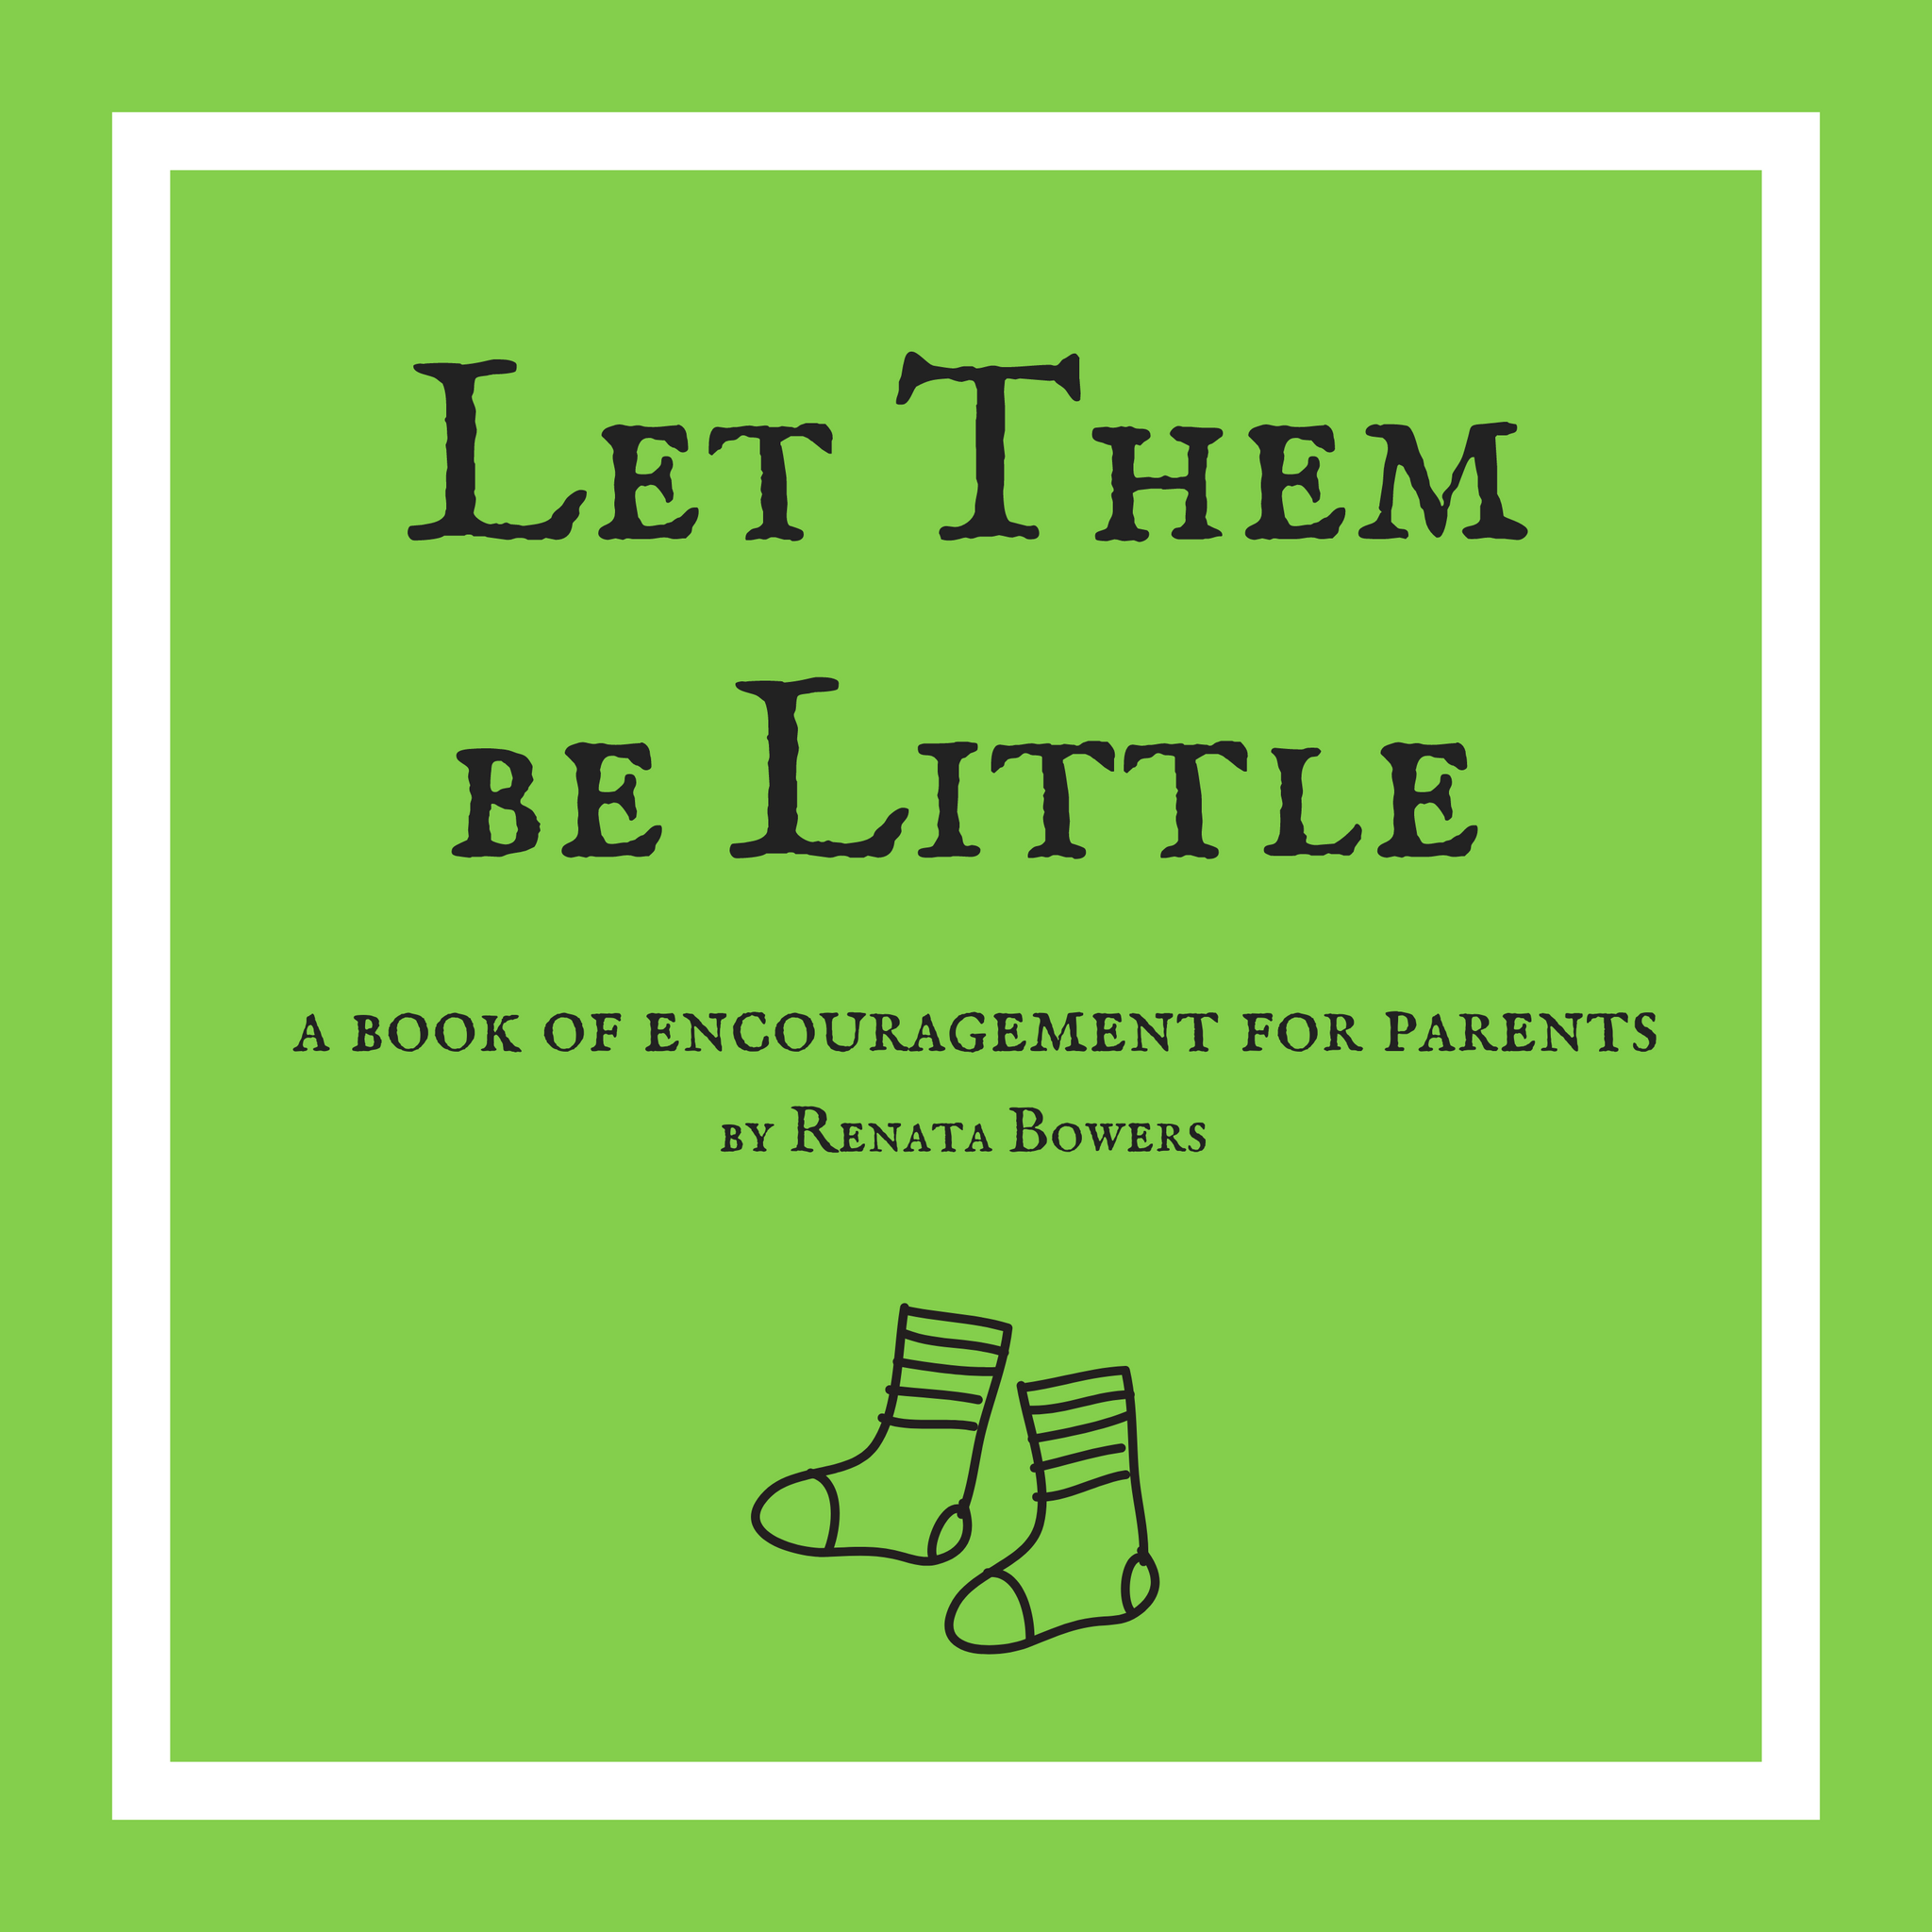 New! Let Them Be Little for Parents_School Store